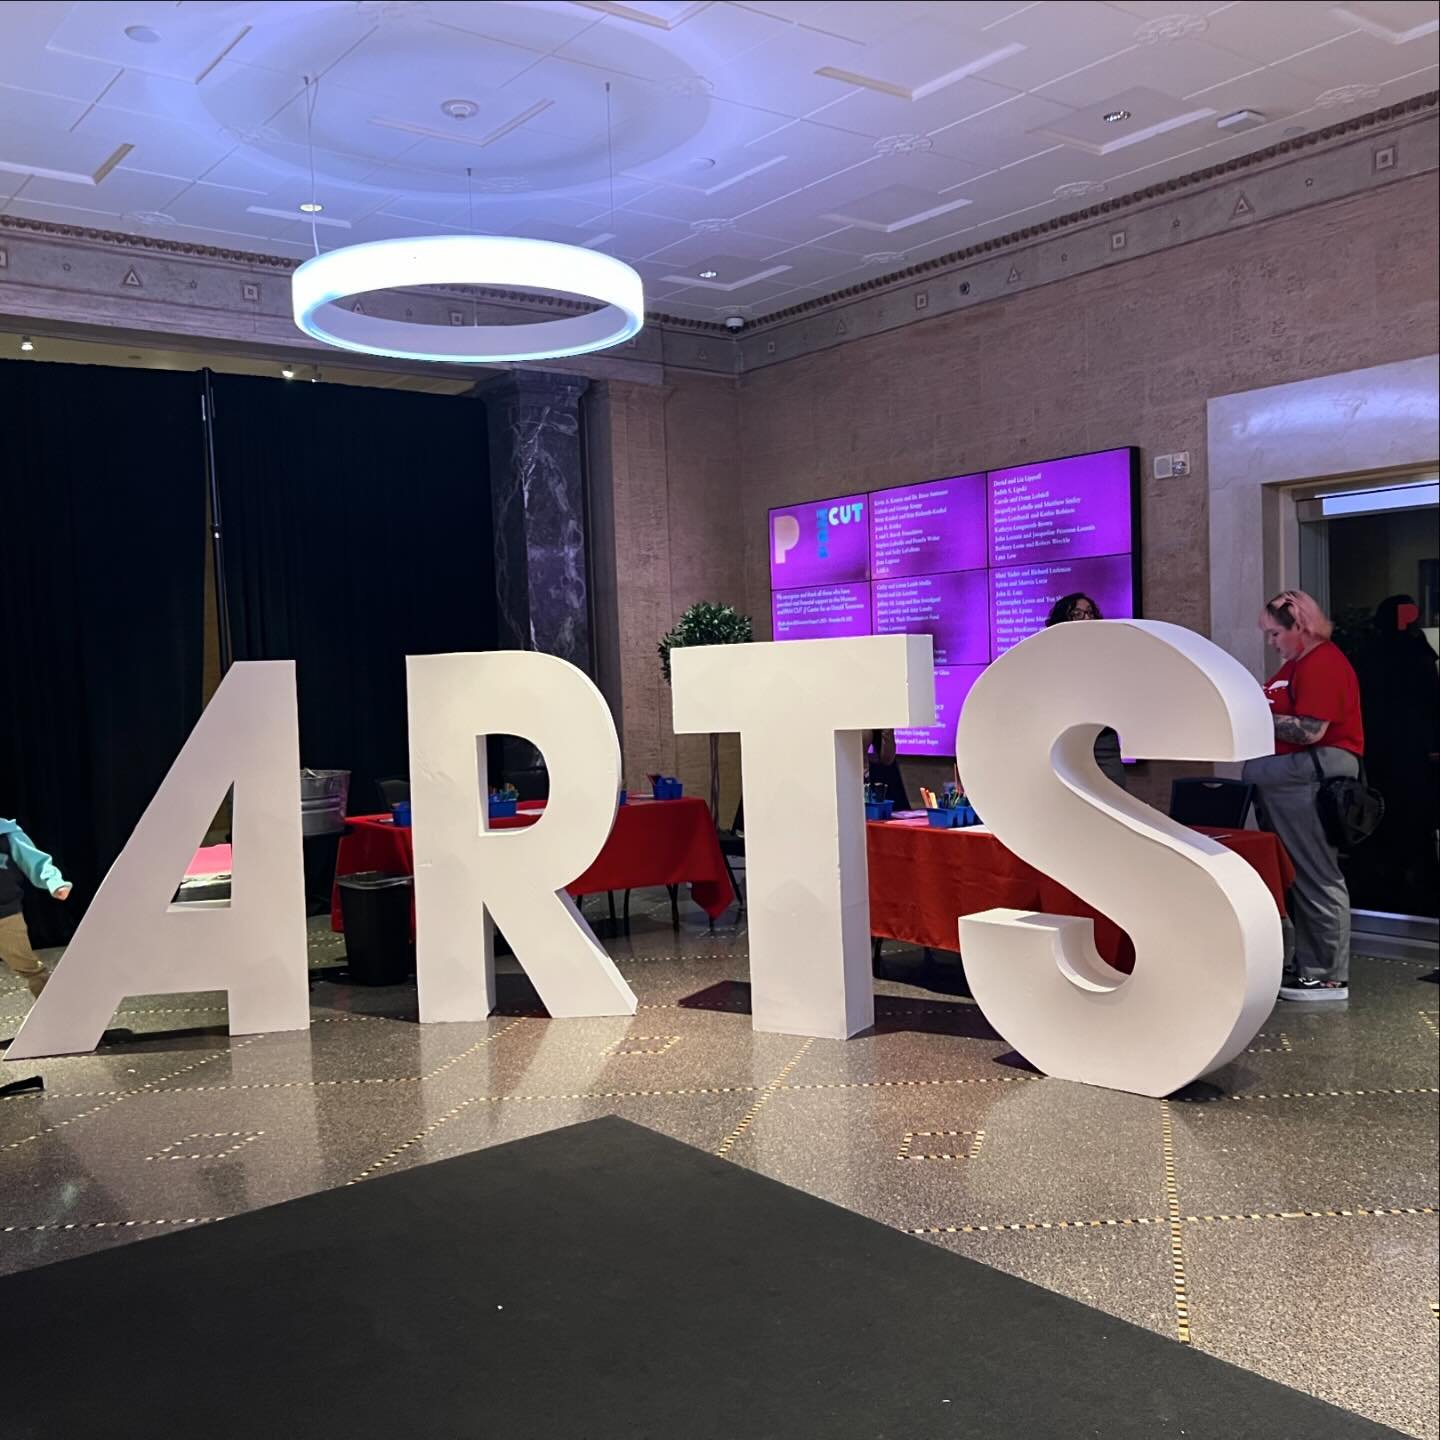 We had such a great time working once again with @portland_public_schools on their annual HeART of Portland event. 

We brought the comms support , graphic design, event support, and an A-R-T-S art installation that was brilliantly activated by artis